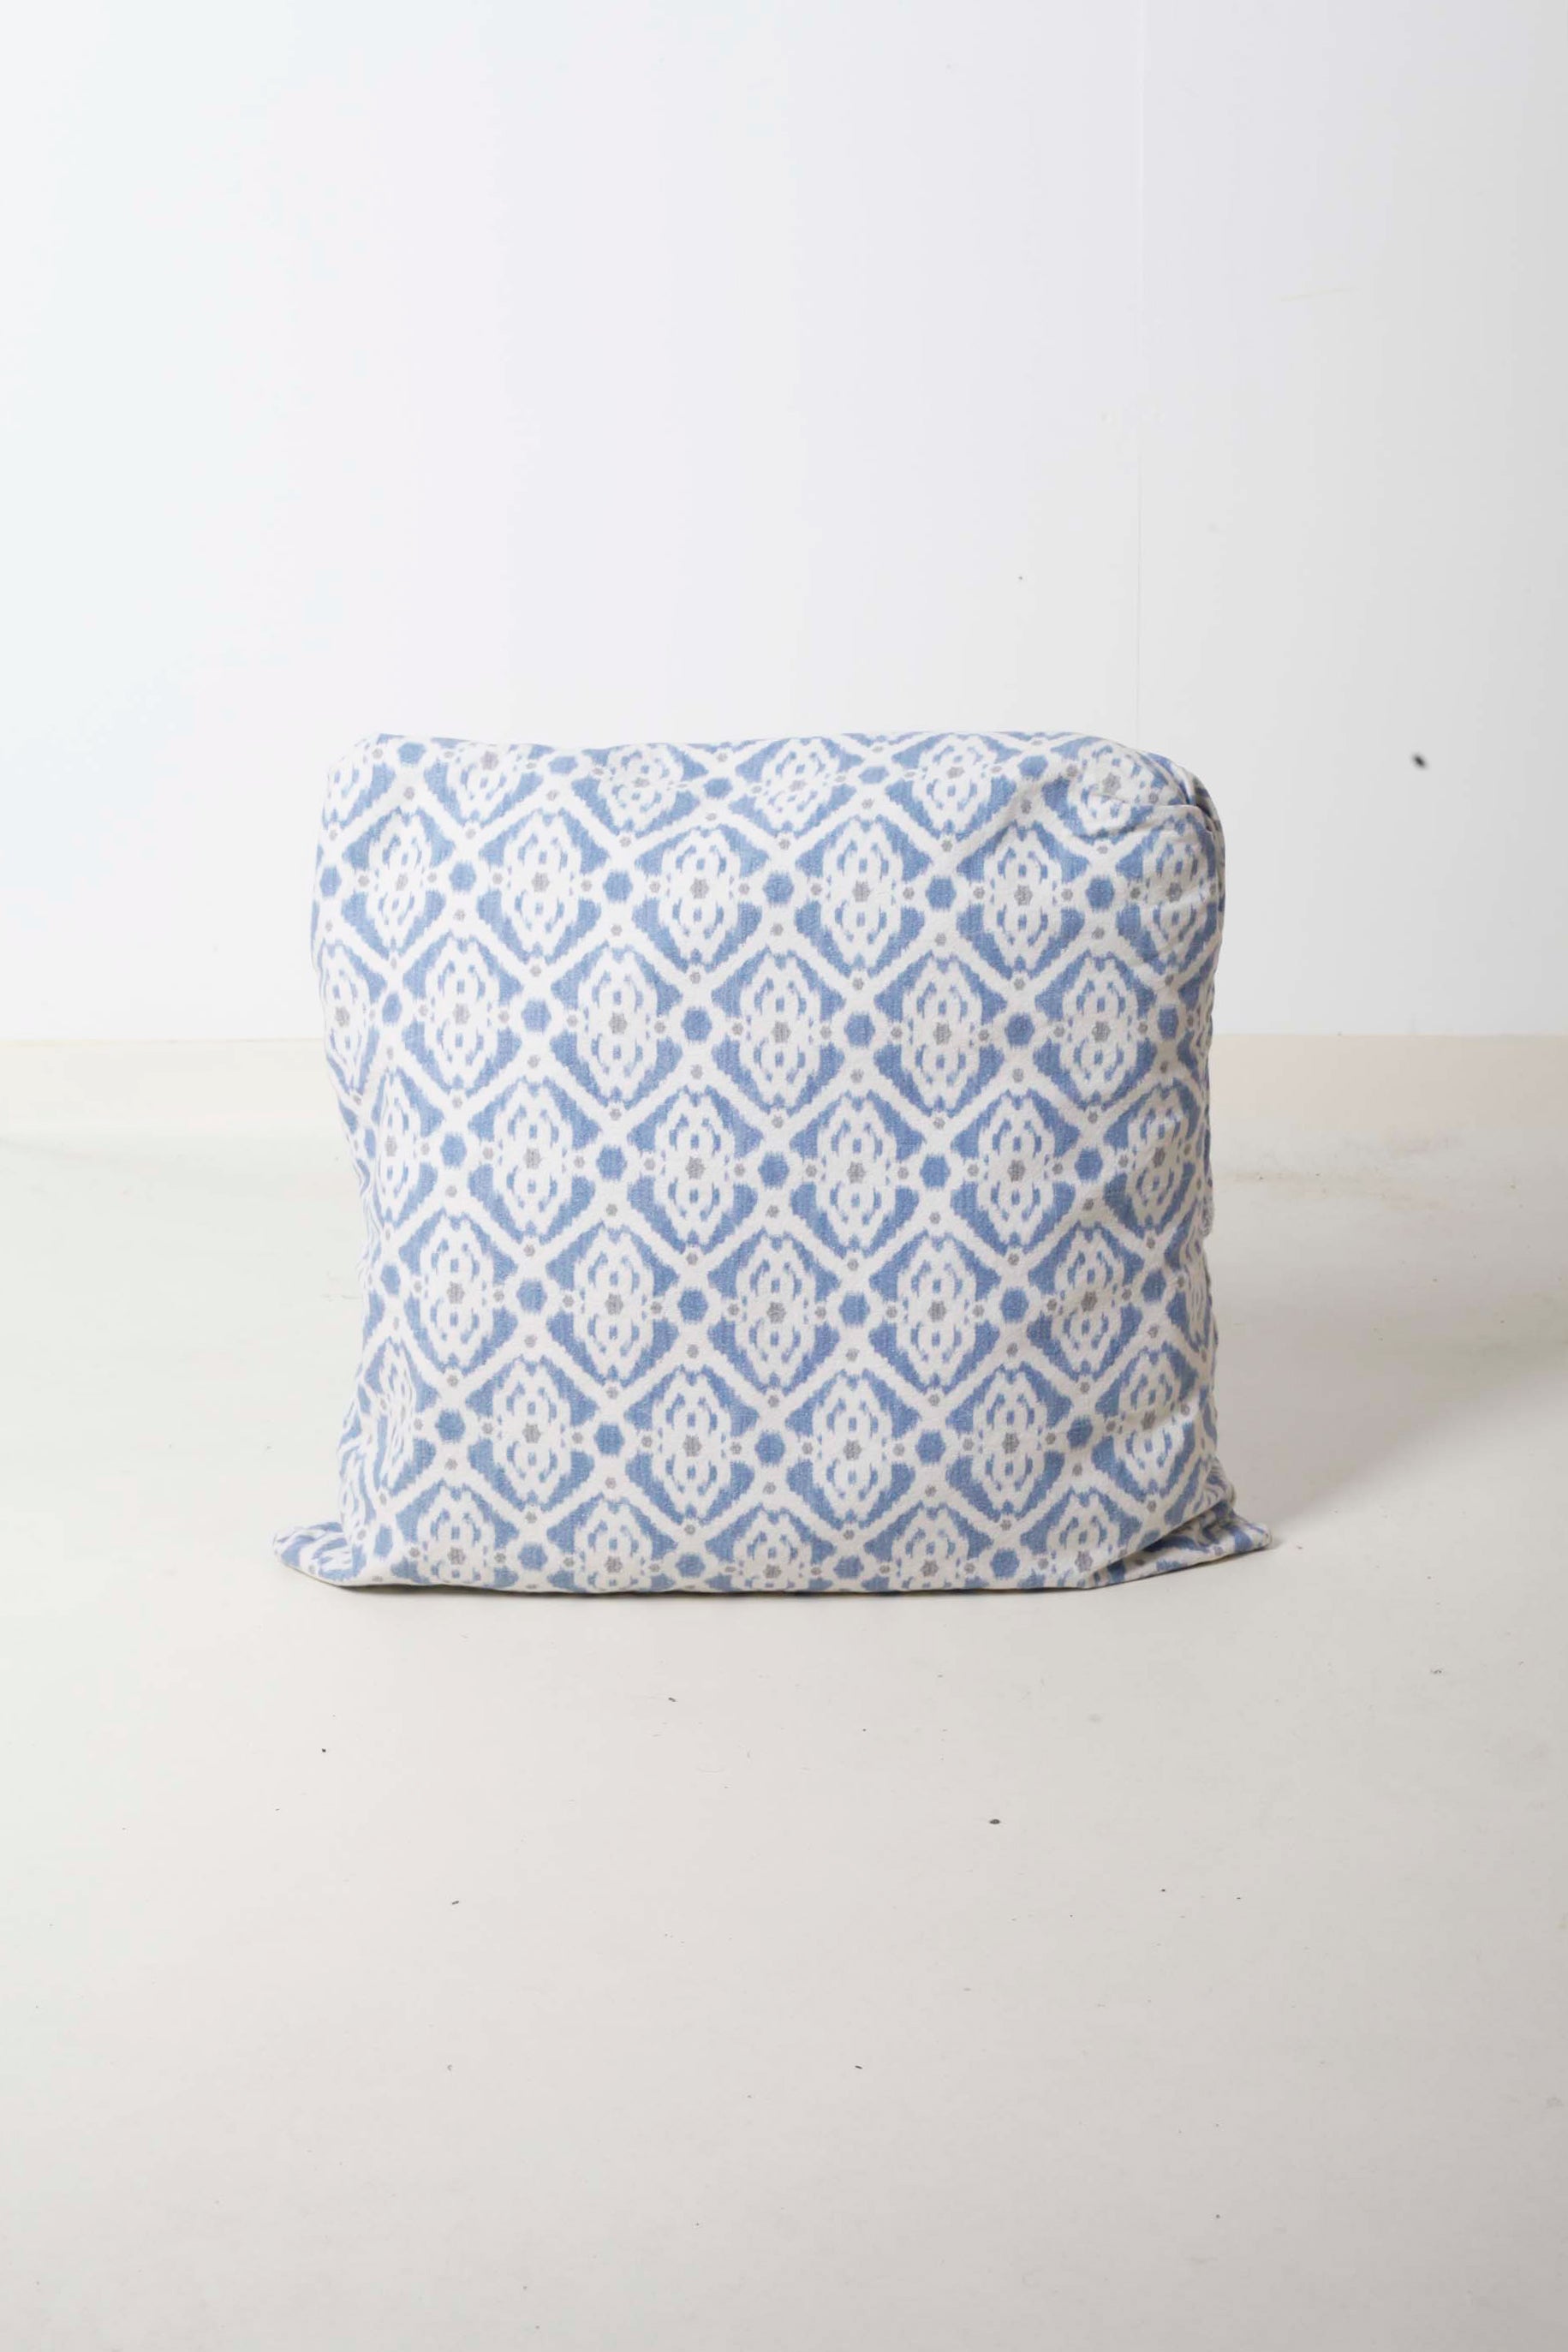 Set of 2 Blue and White Printed Fabric Cushion (2 pieces)